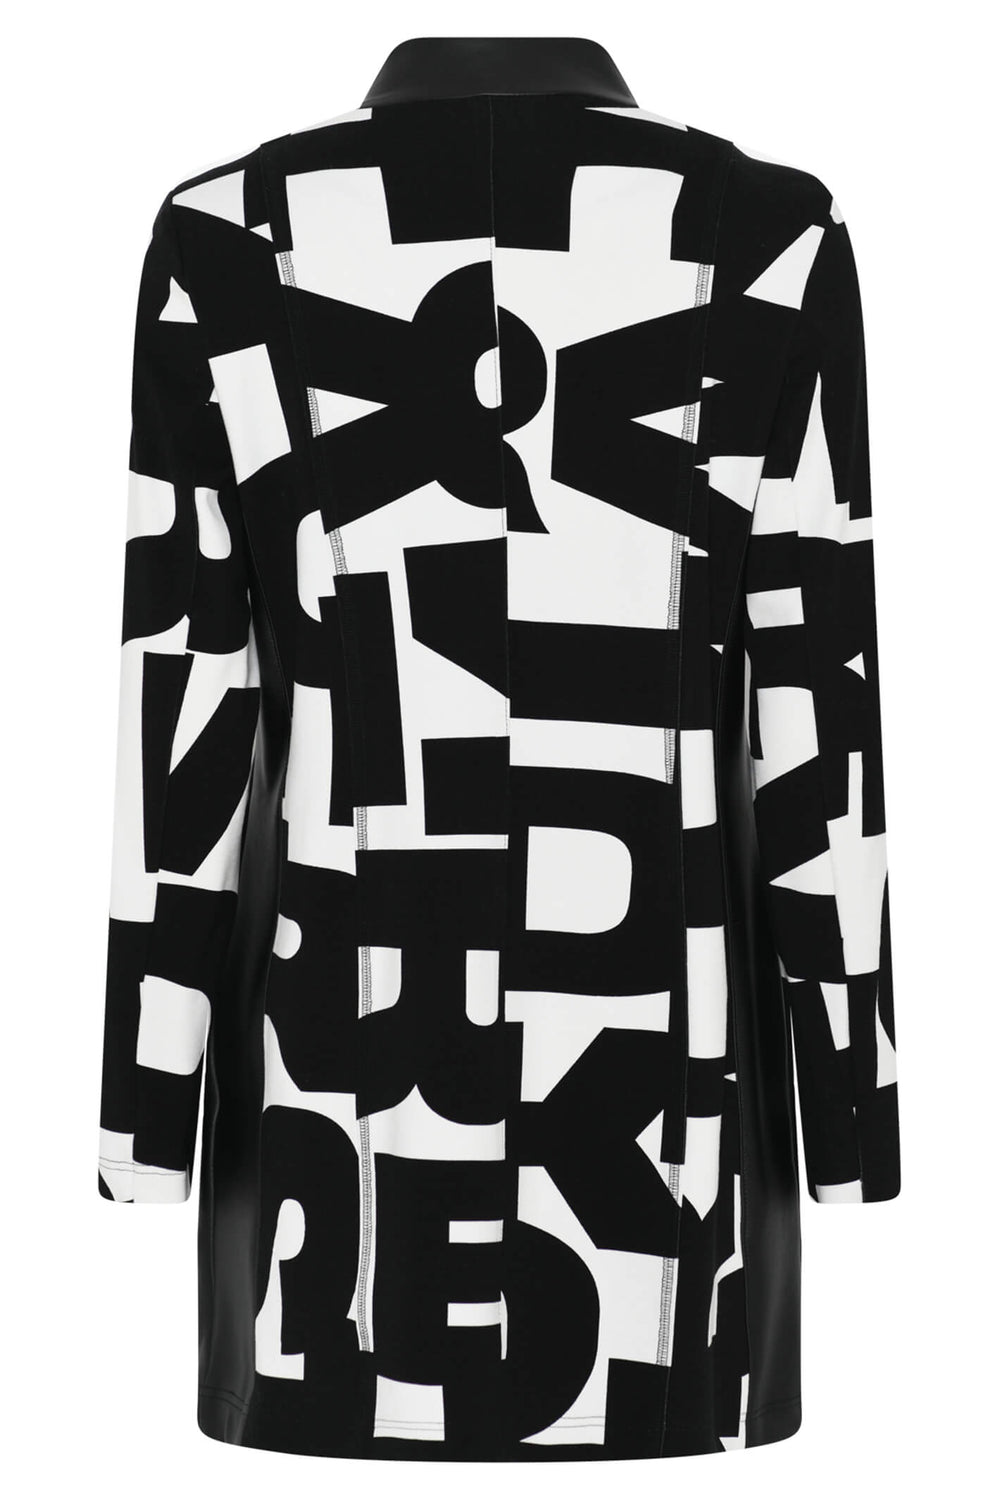 Icona 67136 Black White Letter Print Long Zip Front Jacket - Experience Boutique